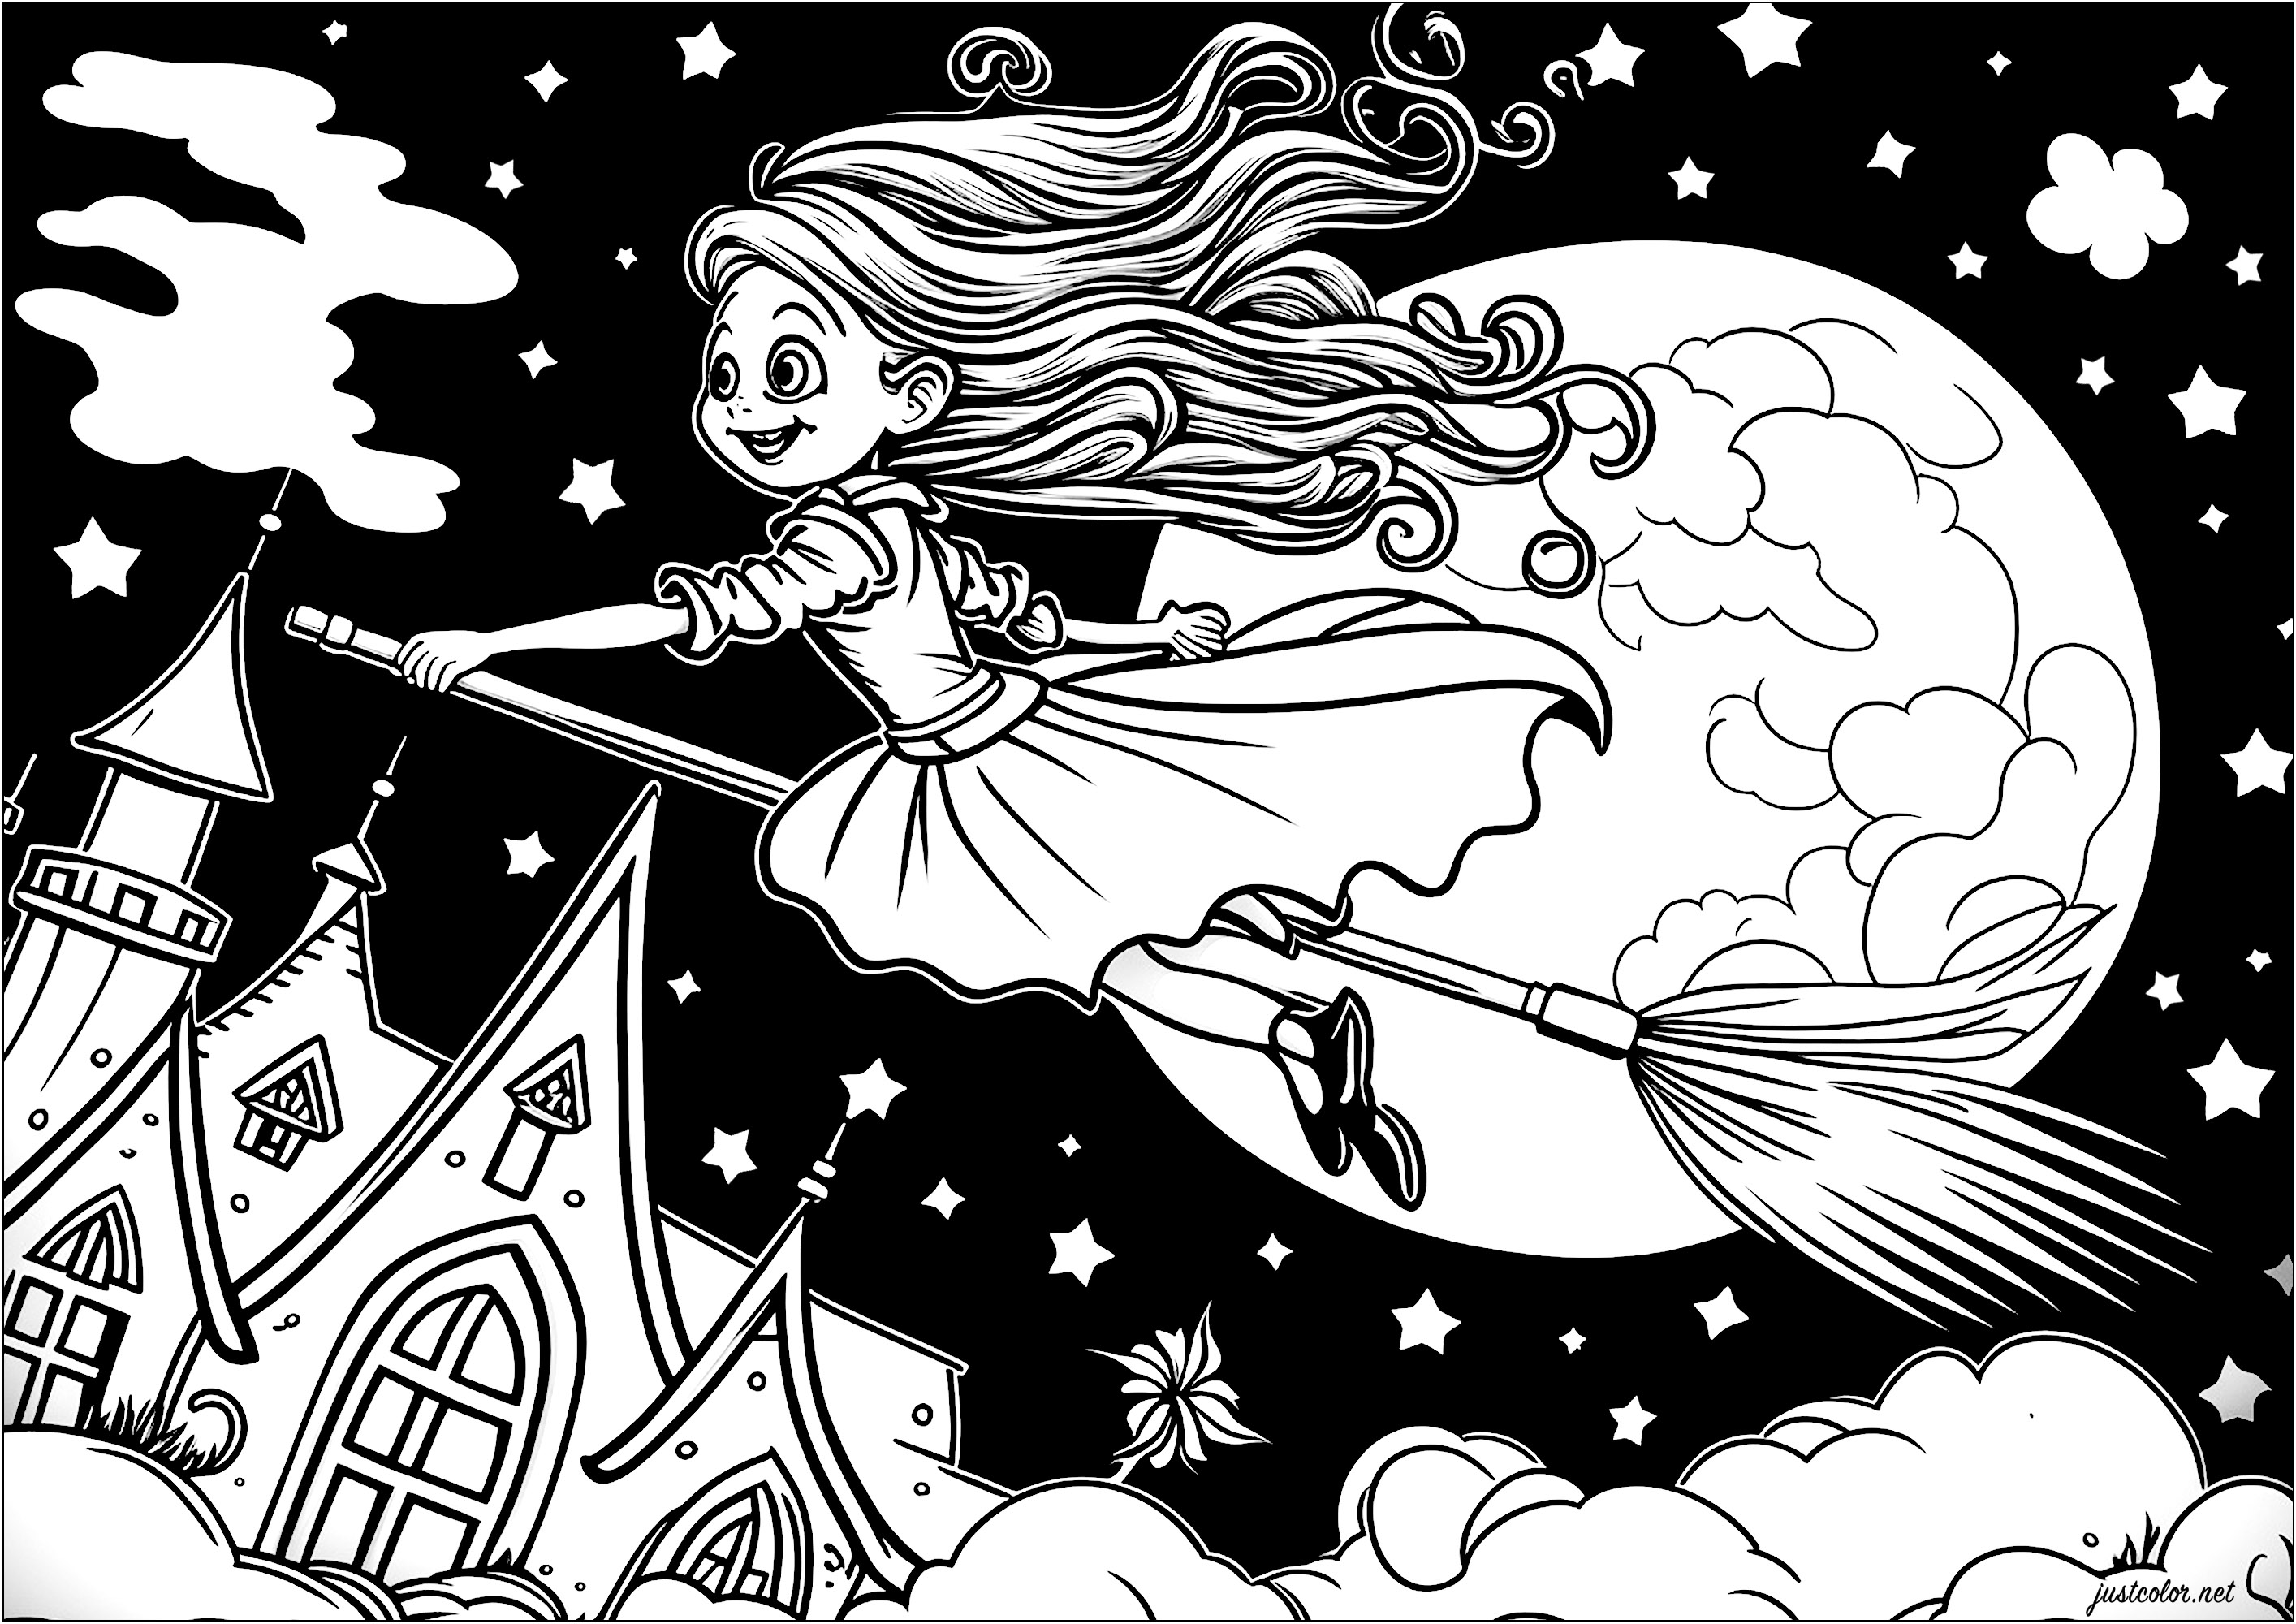 Coloring of a young witch flying on her broom. Here is a pretty witch represented on her broom flying in the air, above the clouds. She is dressed in a long and elegant dress, and her hair is blowing in the wind. The moon is full and looks giant behind her.